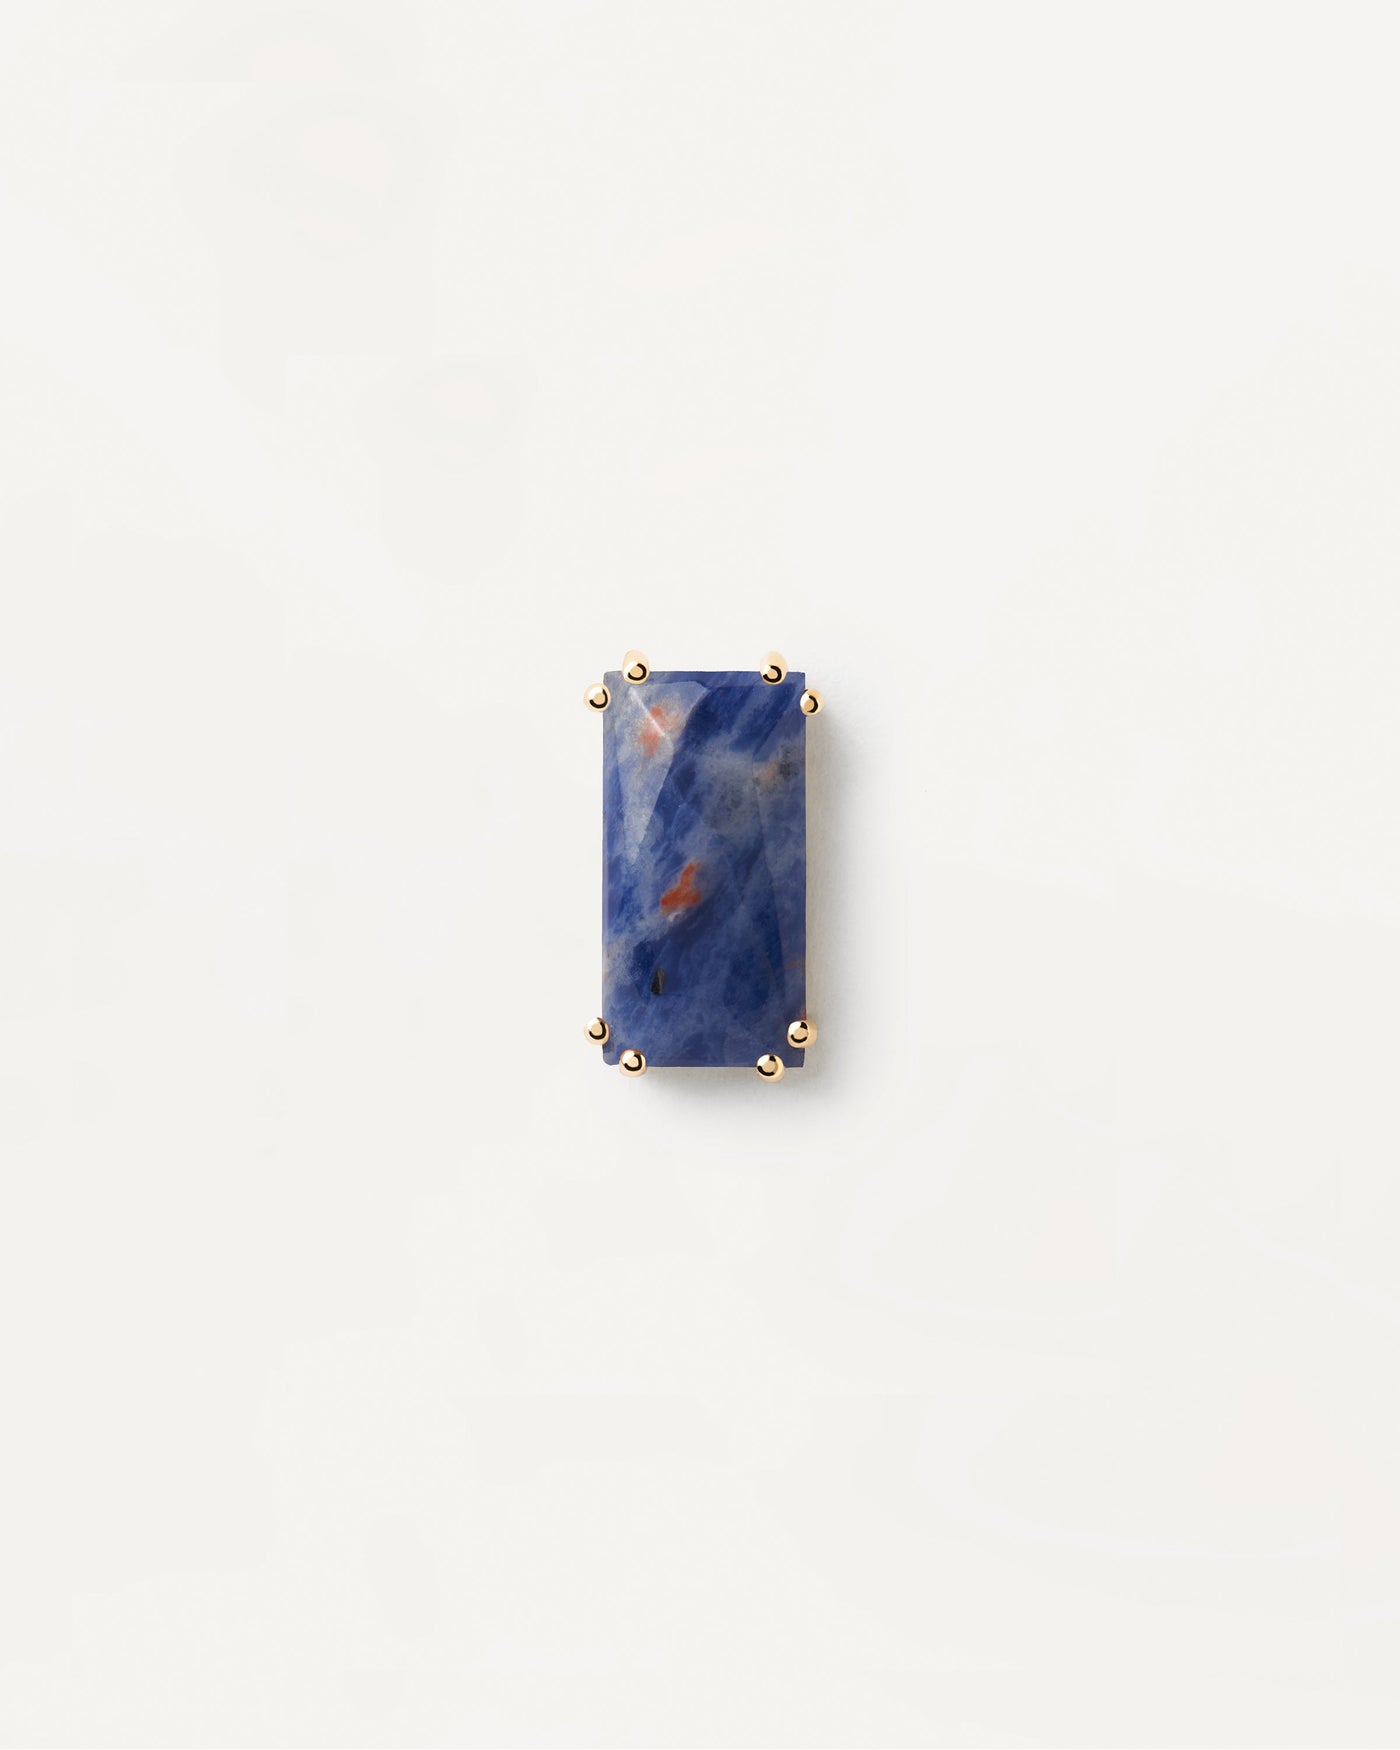 2023 Selection | Maiko Sodalite Single Earring. Gold-plated pin ear piercing with dark blue gemstone in rectangular shape. Get the latest arrival from PDPAOLA. Place your order safely and get this Best Seller. Free Shipping.